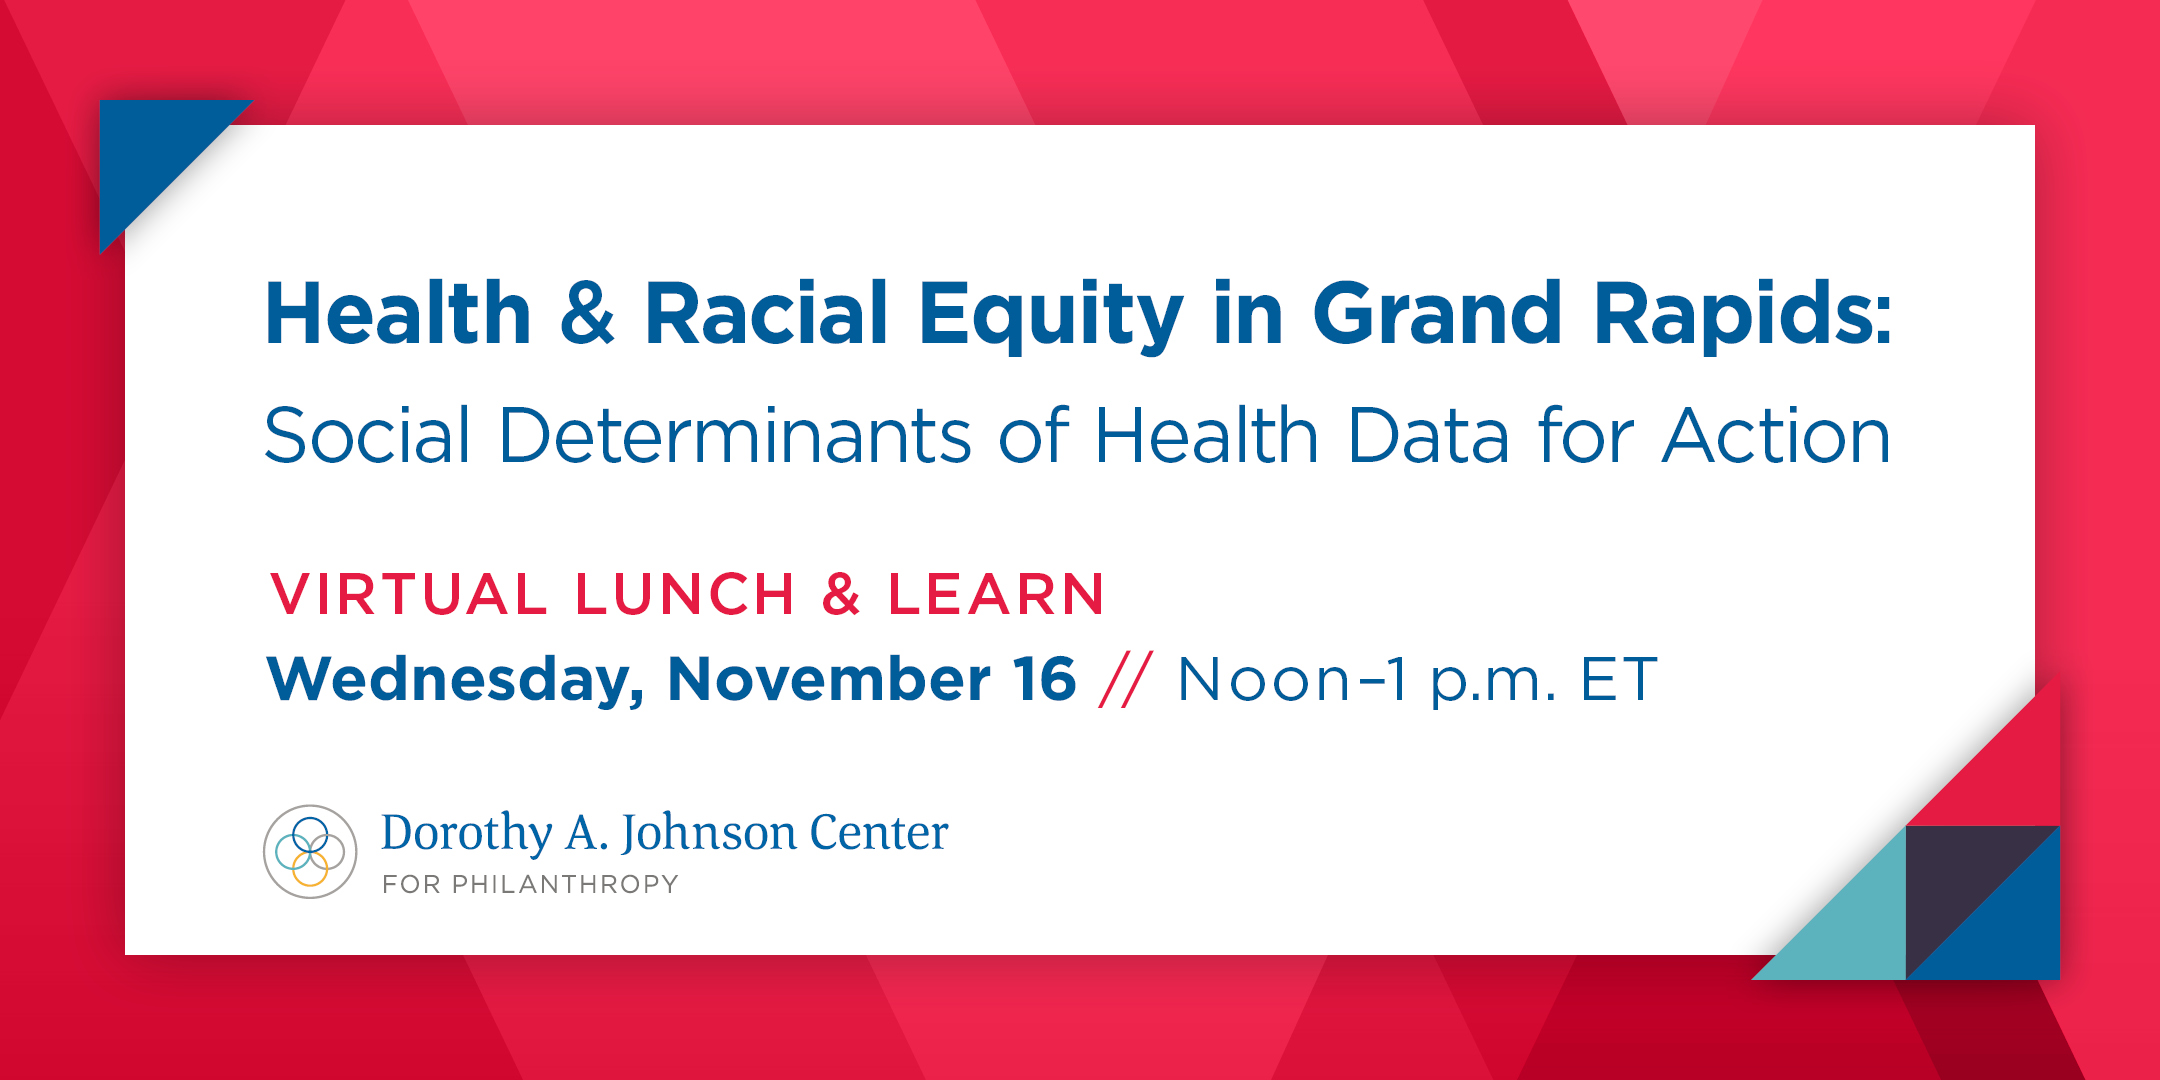 Health & Racial Equity in Grand Rapids: Social Determinants of Health Data for Action // Virtual Lunch & Learn // Wednesday, November 16, Noon–1 p.m.